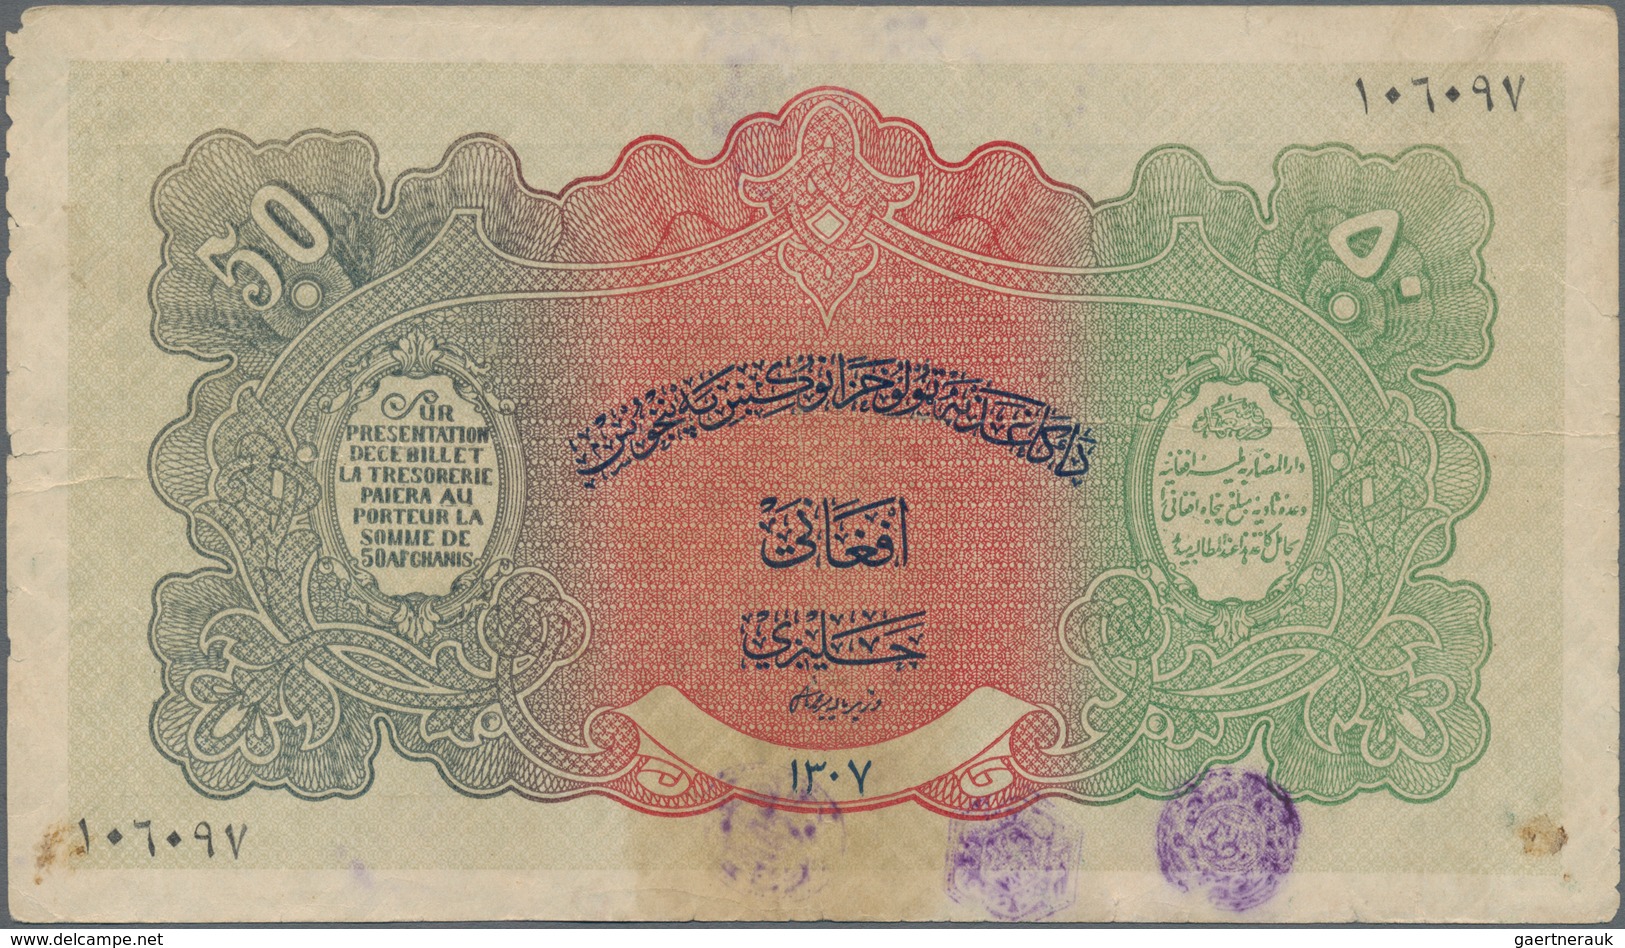 Afghanistan: Pair Of 5 And 50 Afghanis SH1307 (1928) Both With "Baccha I Saqao" Revolution Stamps, P - Afghanistán